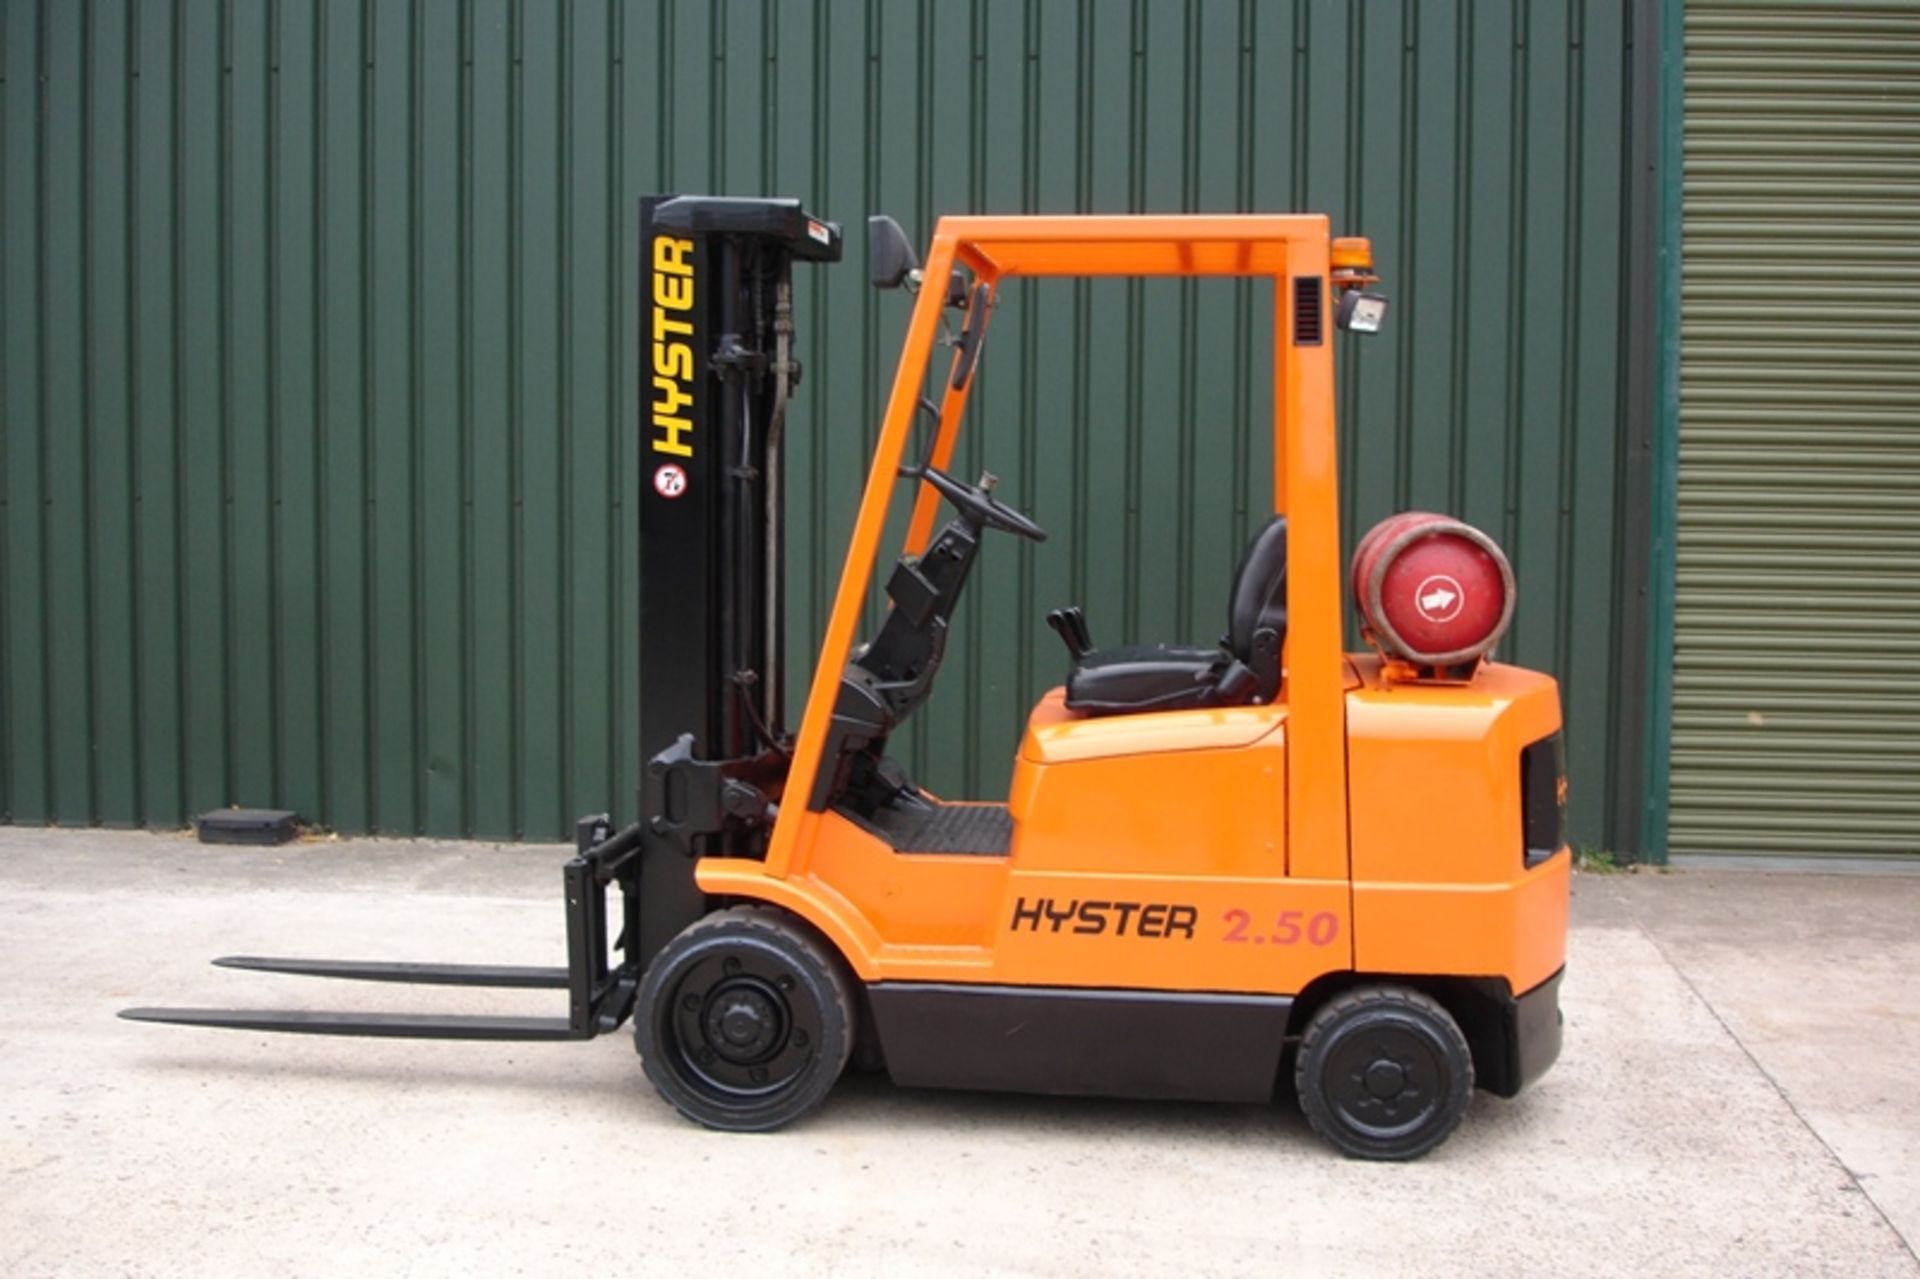 Hyster 2.5 Ton Compact Forklift